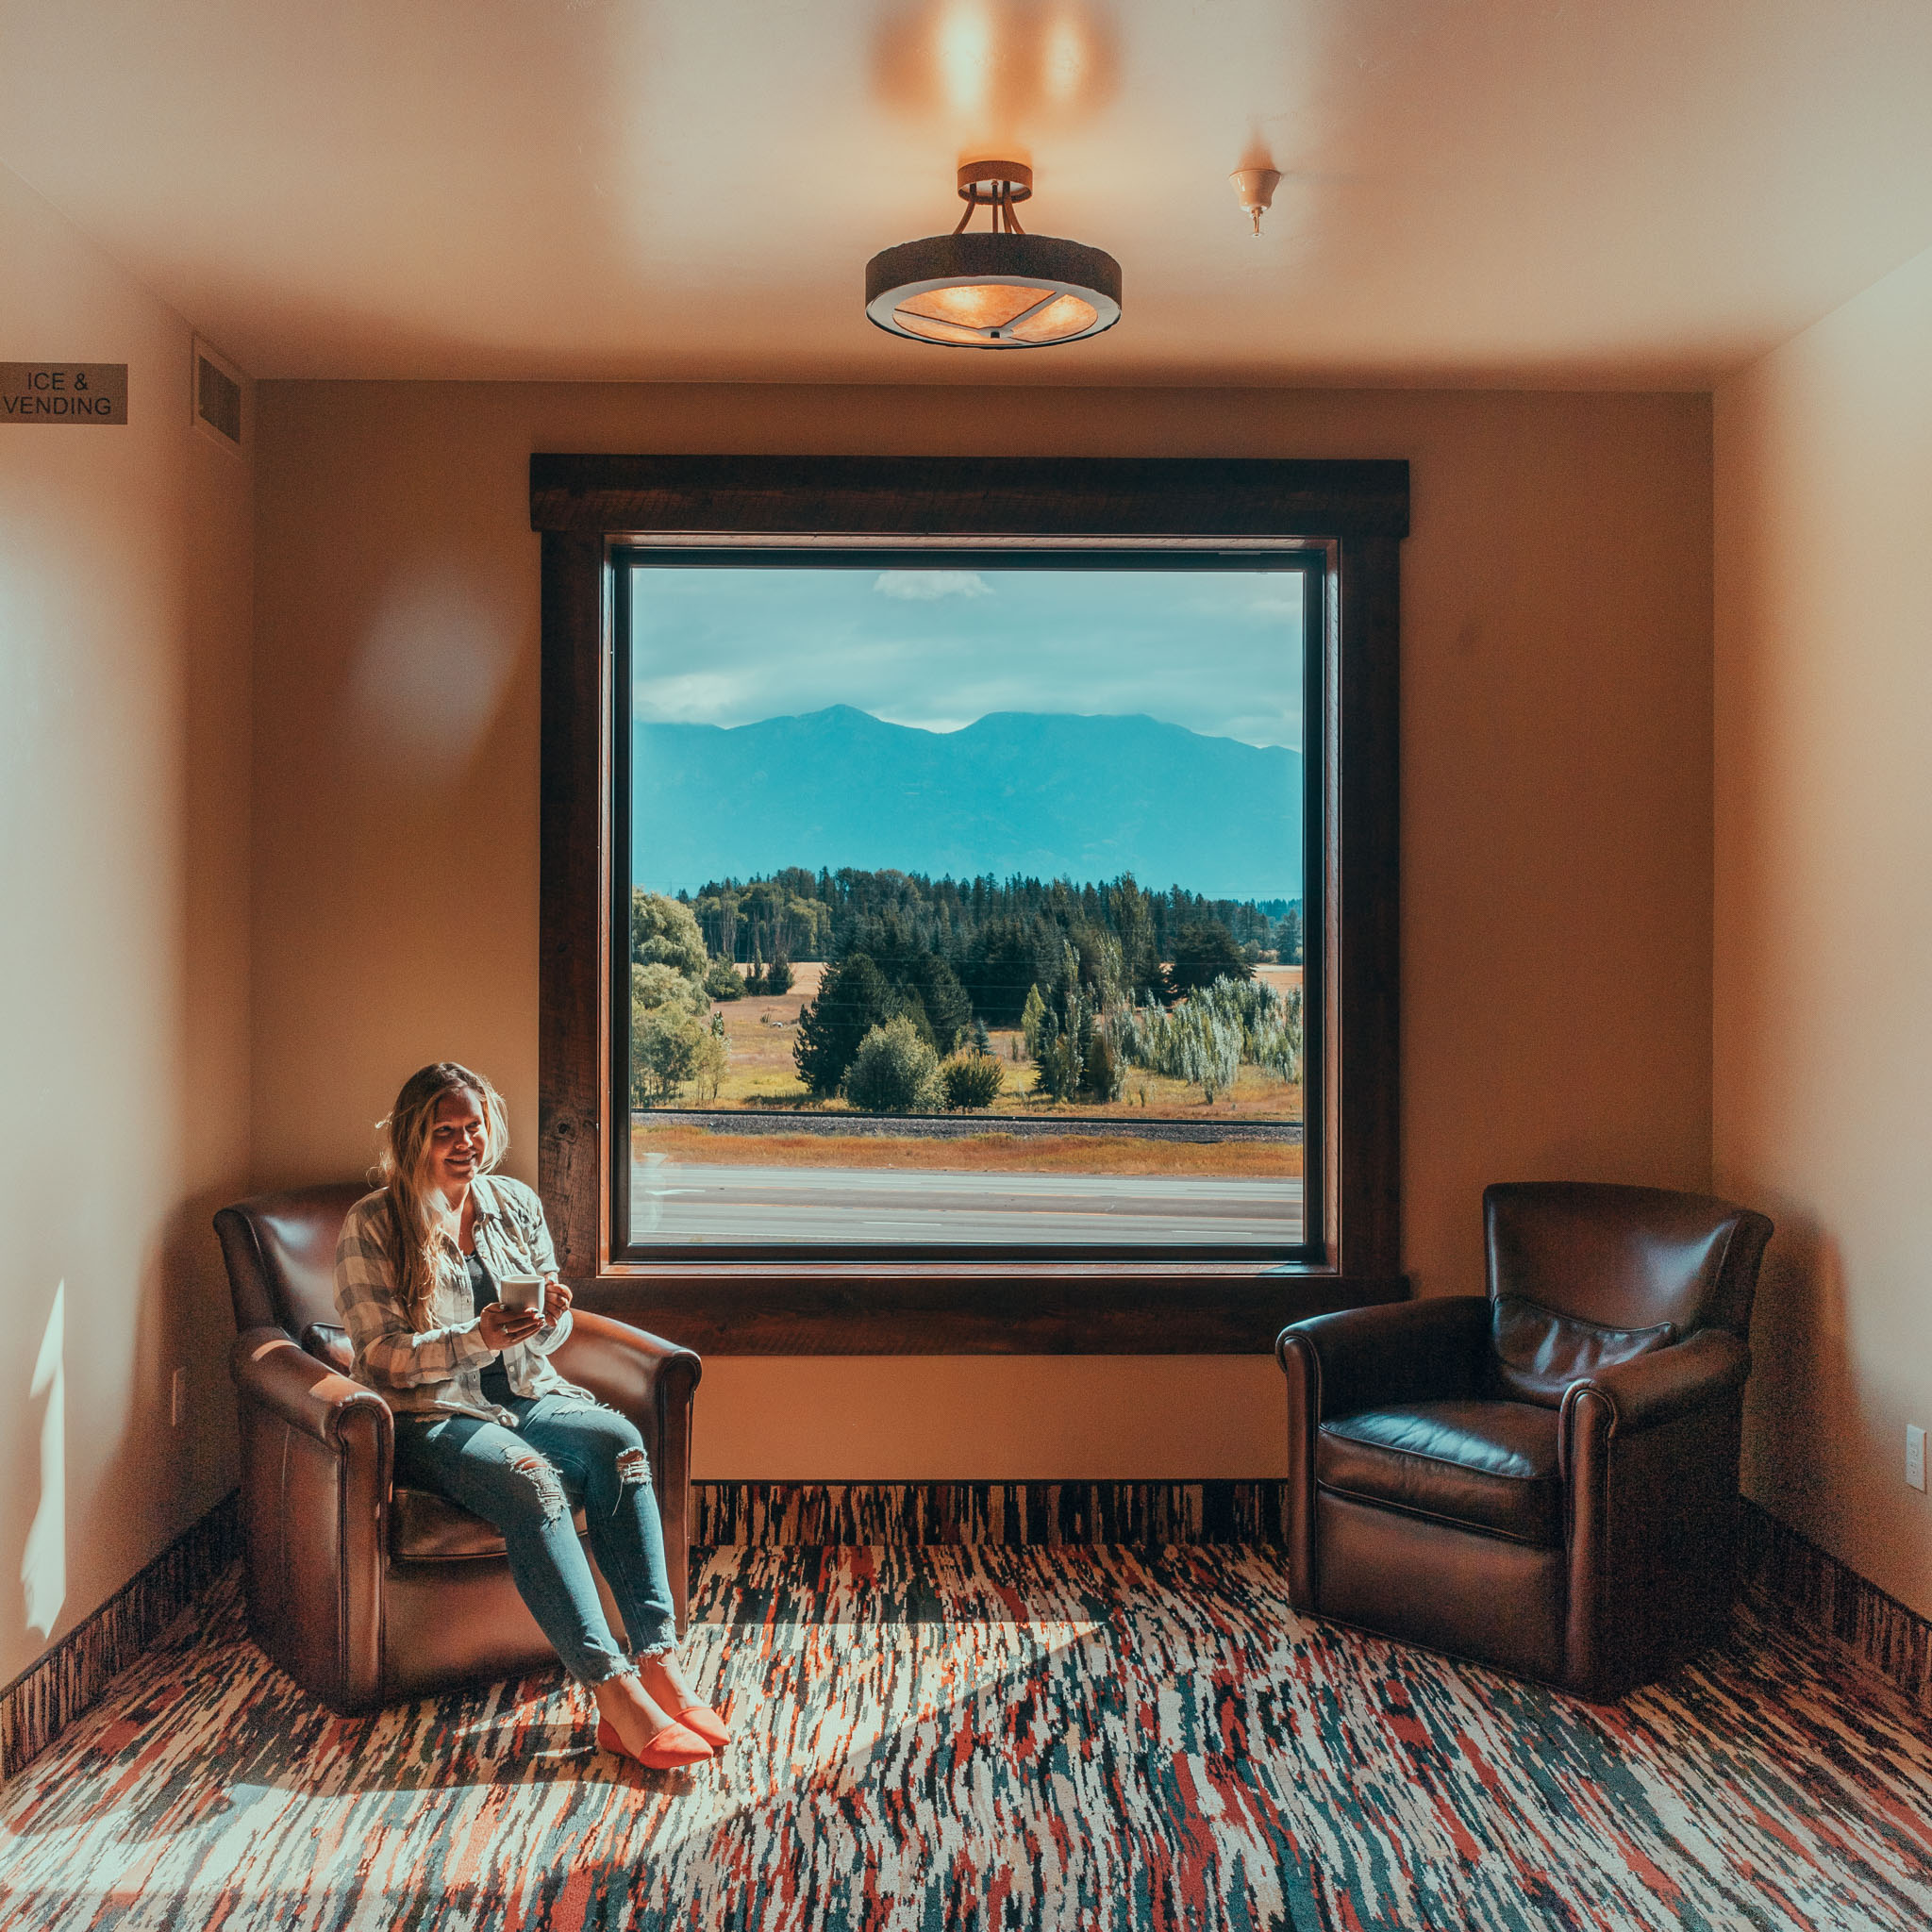 Inside the Country Inn and Suites by Radisson in Kalispell, Montana